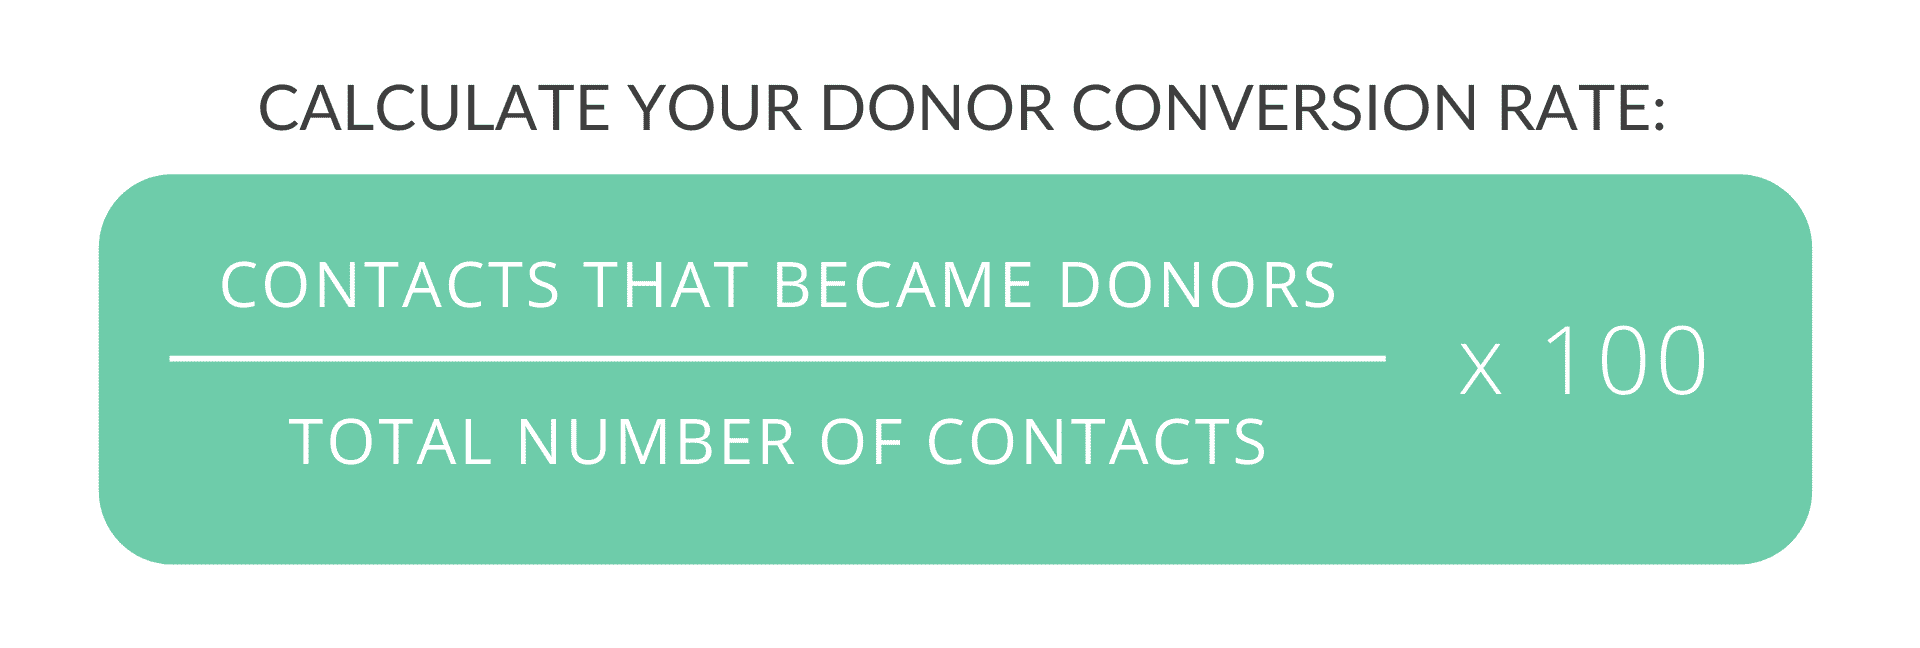 formula to calculate donor conversion rate